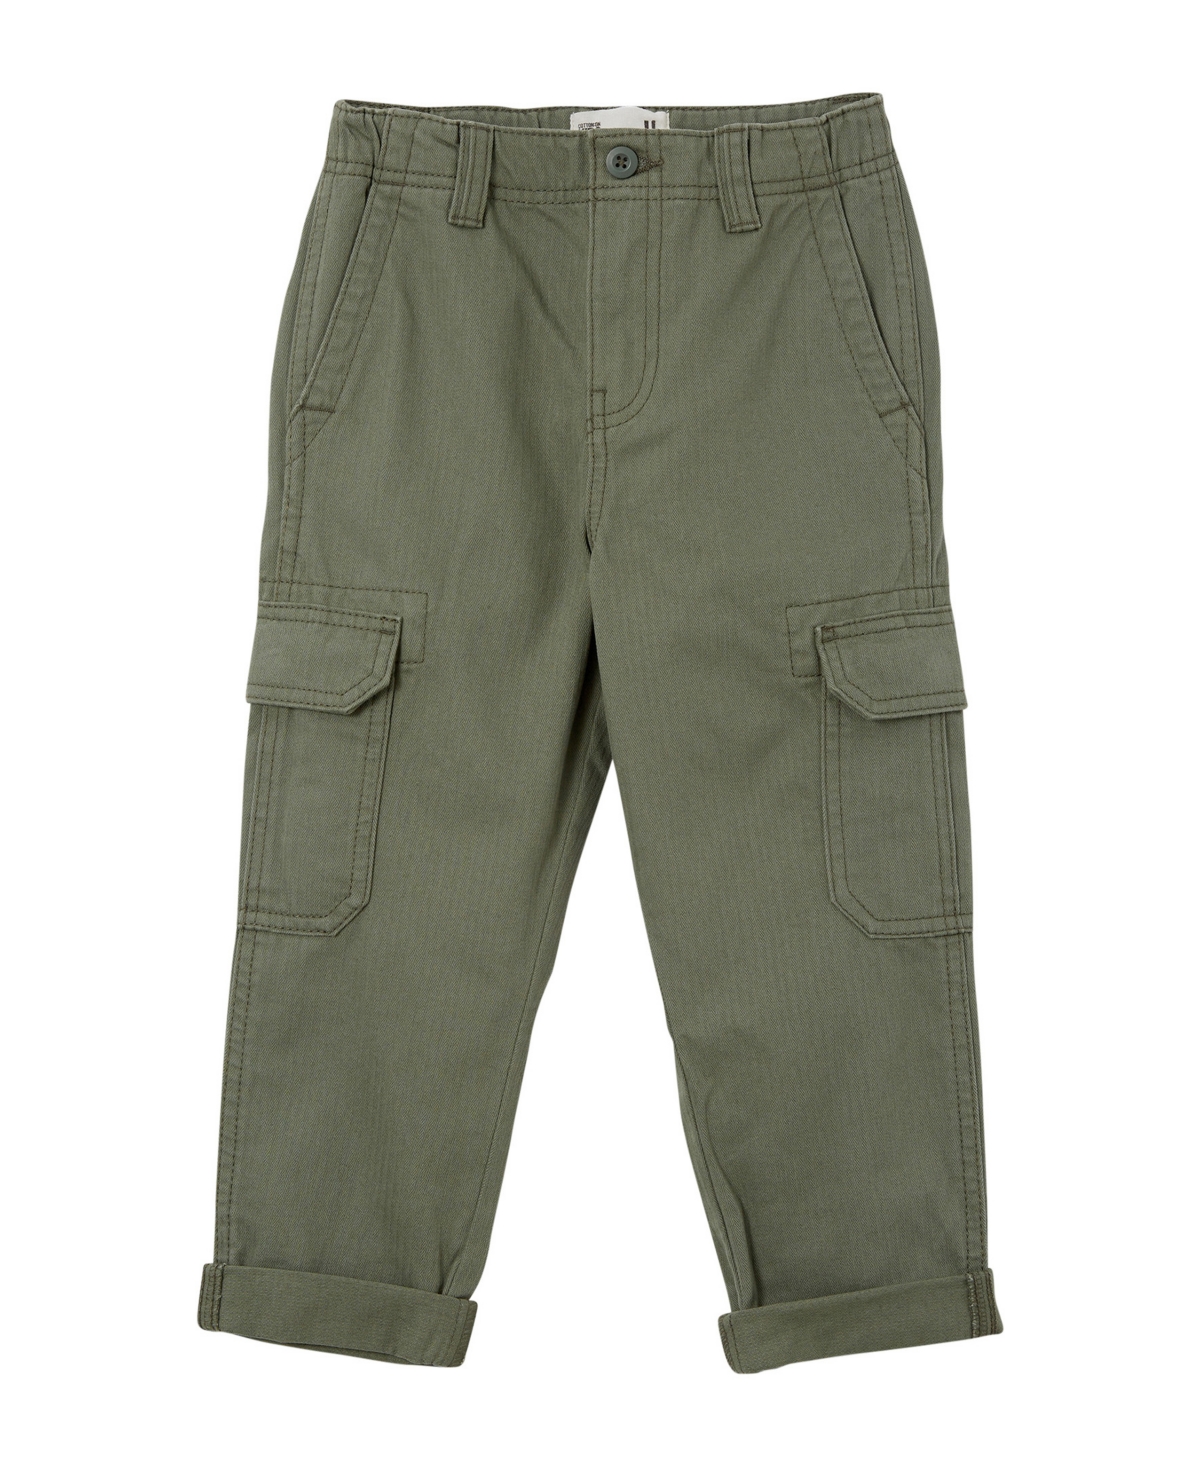 COTTON ON TODDLER BOYS BAGGY FIT UTILITY CARGO POCKET PANTS